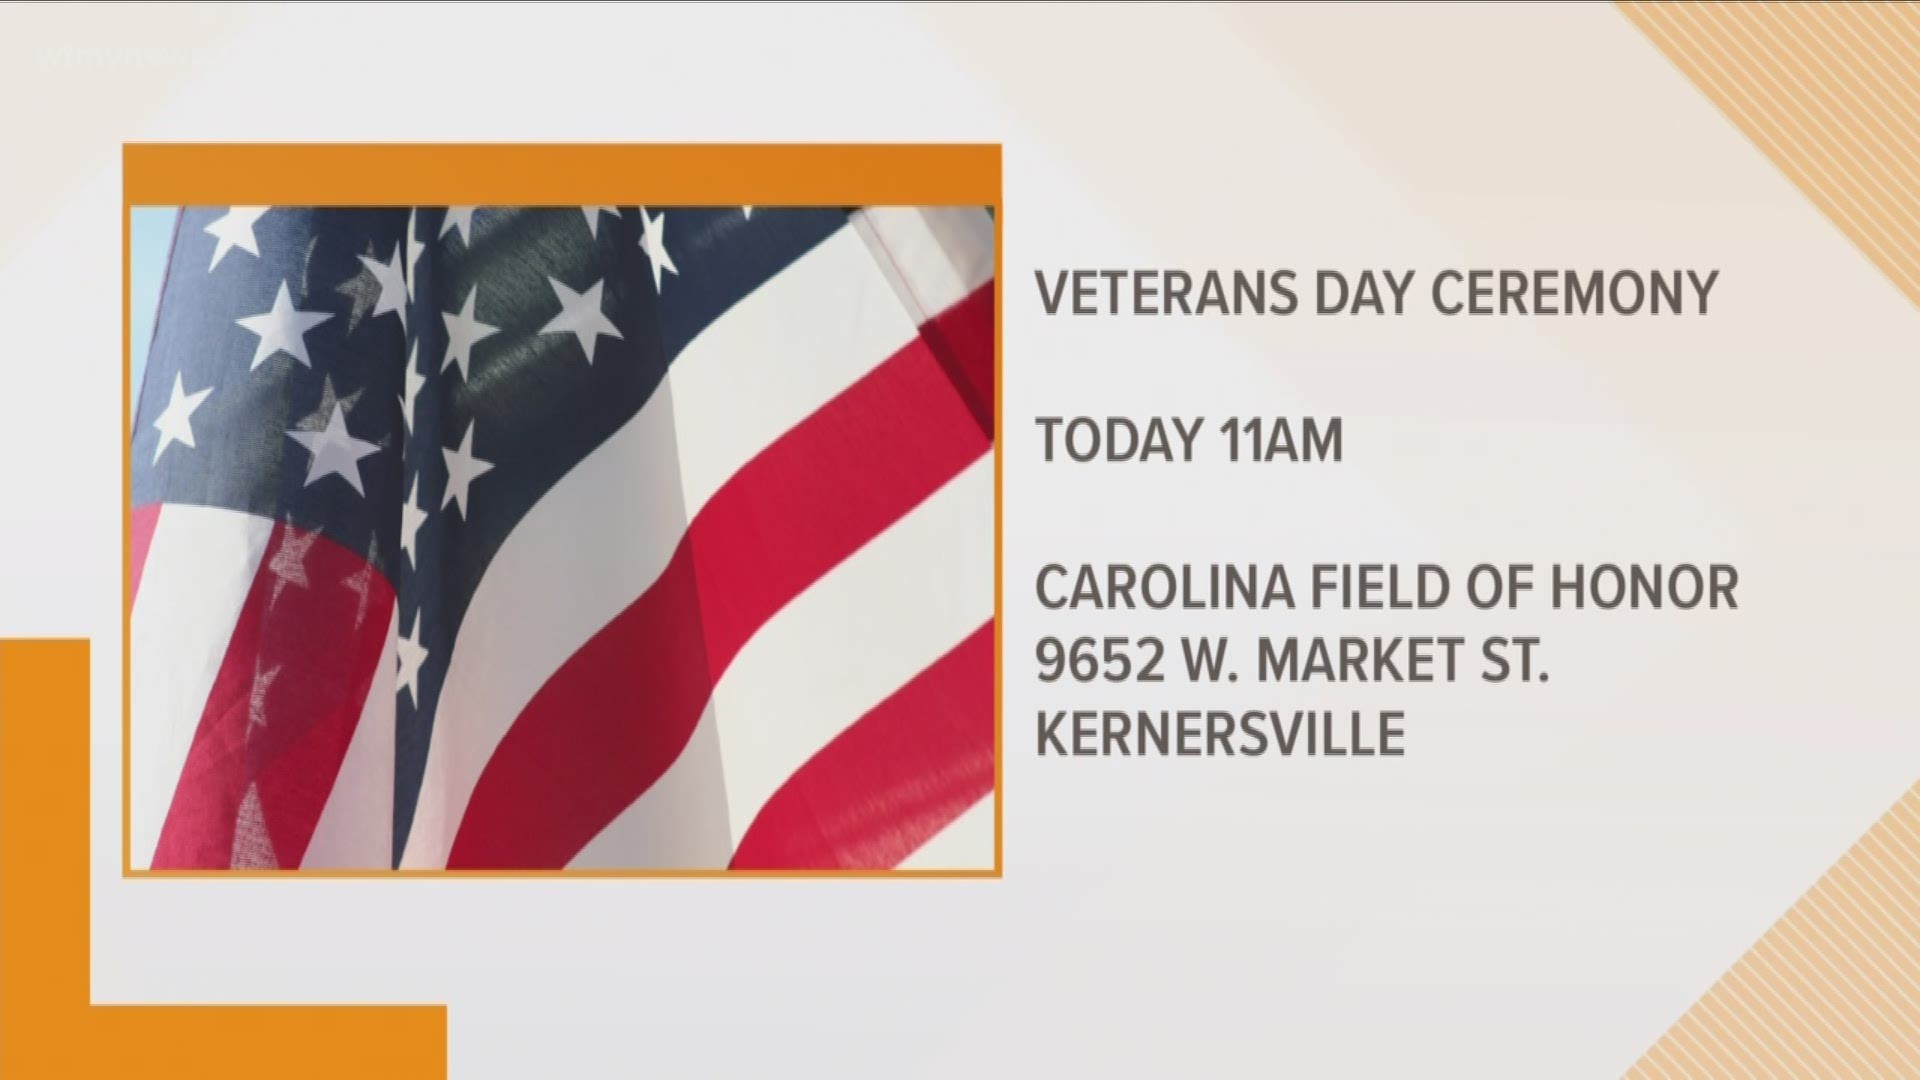 A special Veterans Day Ceremony will be held on Monday at The Carolina Field of Honor at Triad Park in Kernersville.